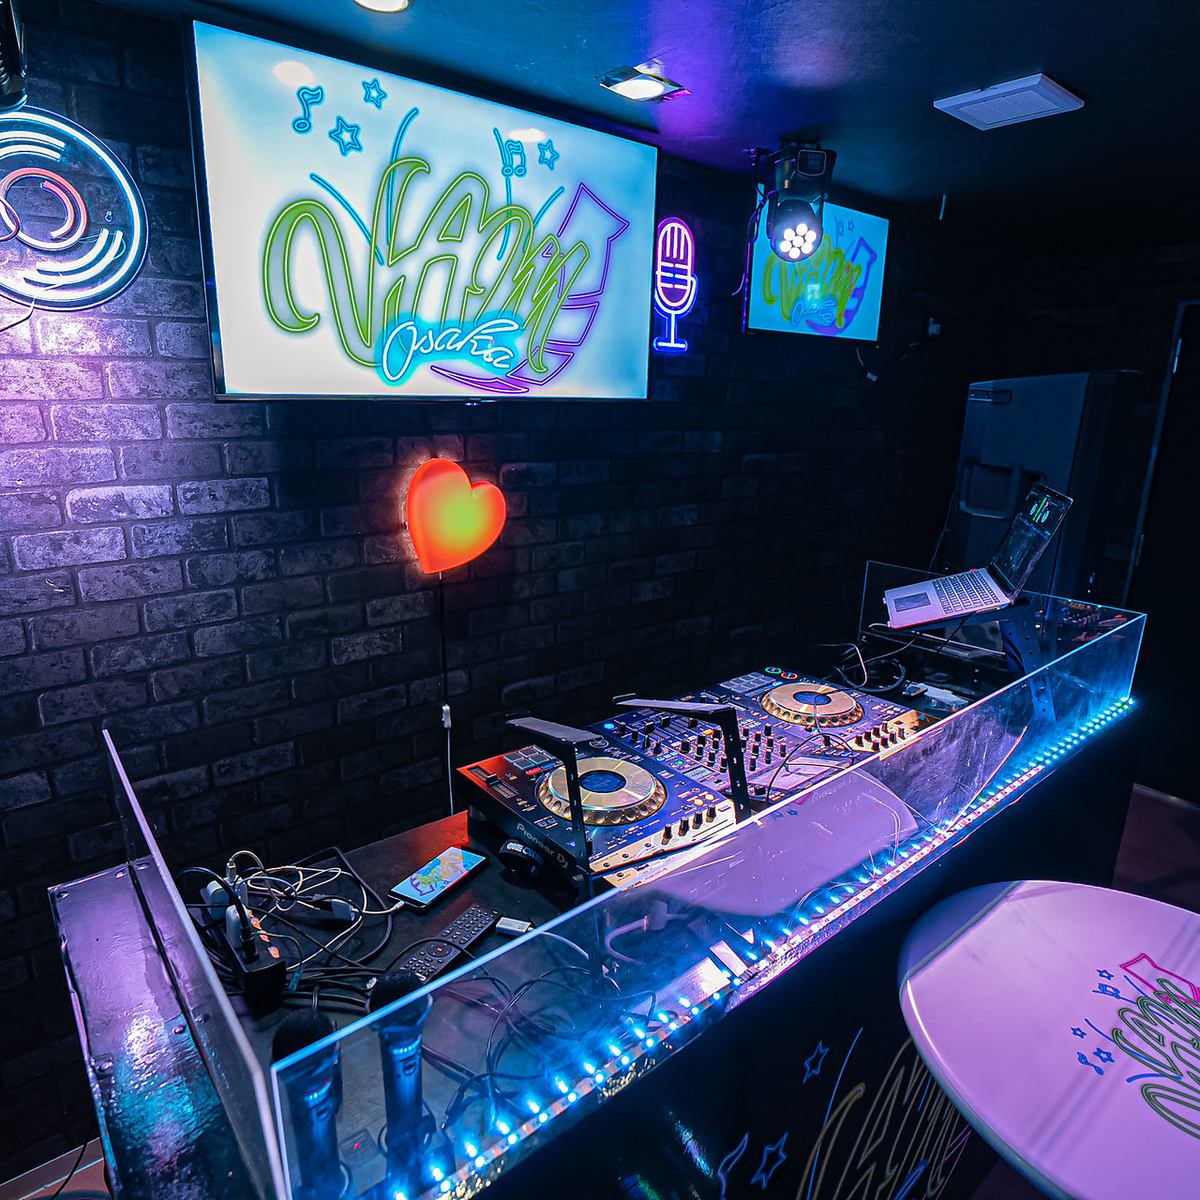 Open late at night! We also have a DJ booth and hold events! Complete with darts and karaoke♪